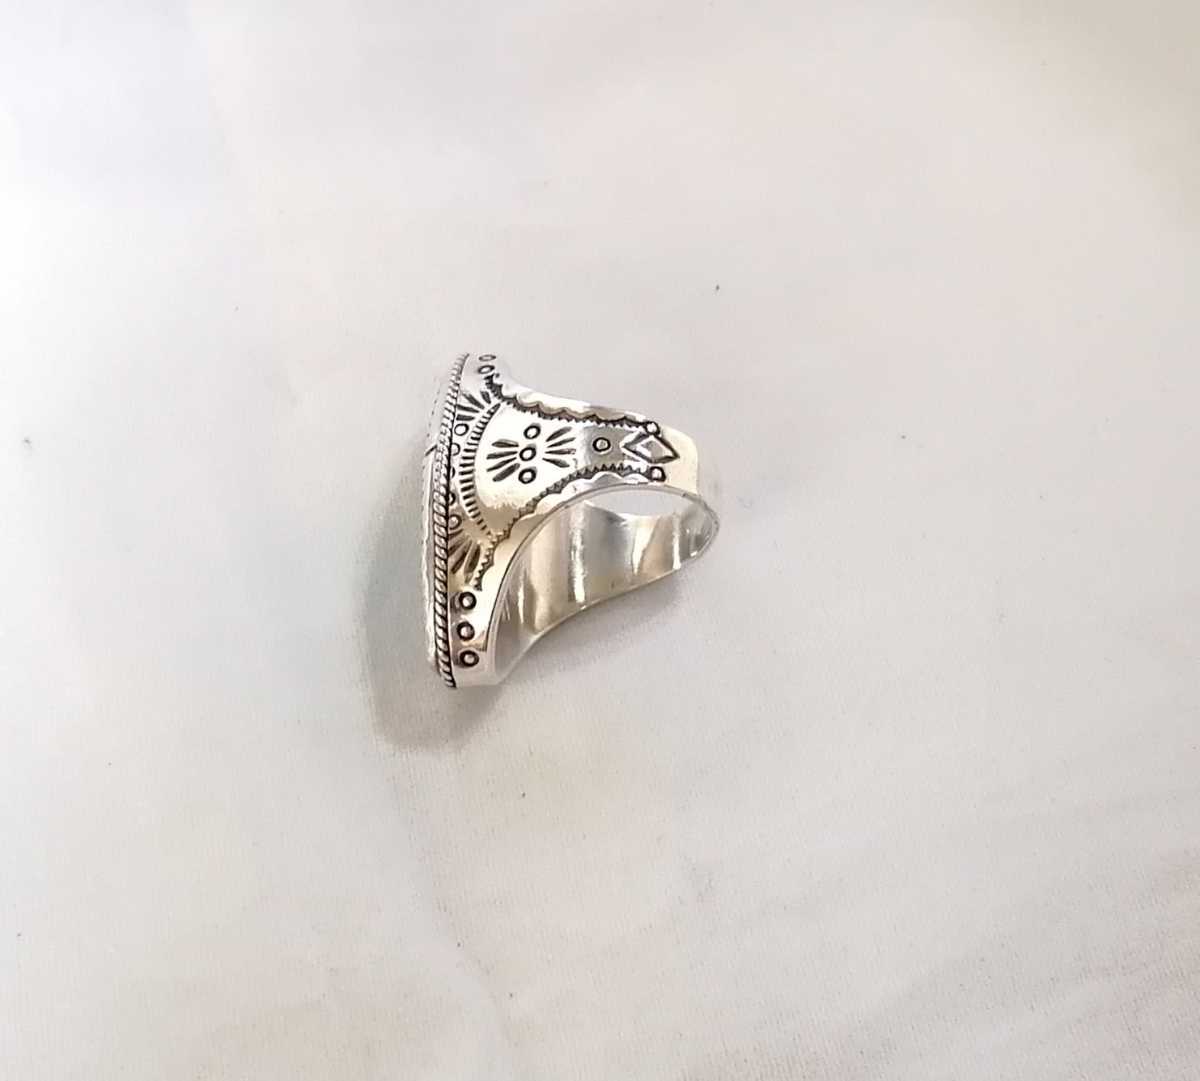  Vintage Indian jewelry ring 